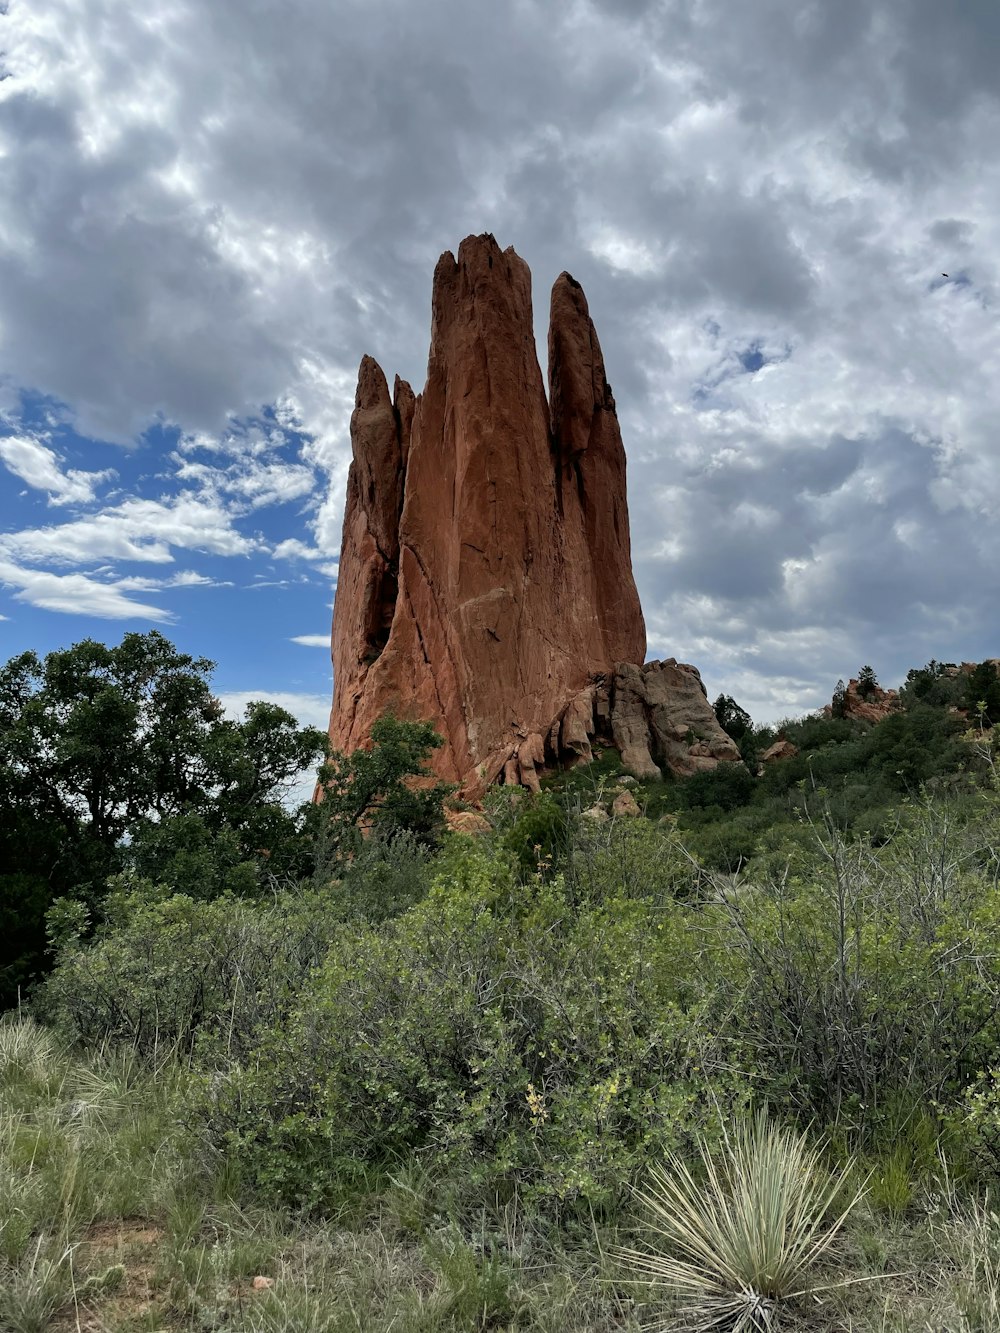 a tall rock formation in a grassy area